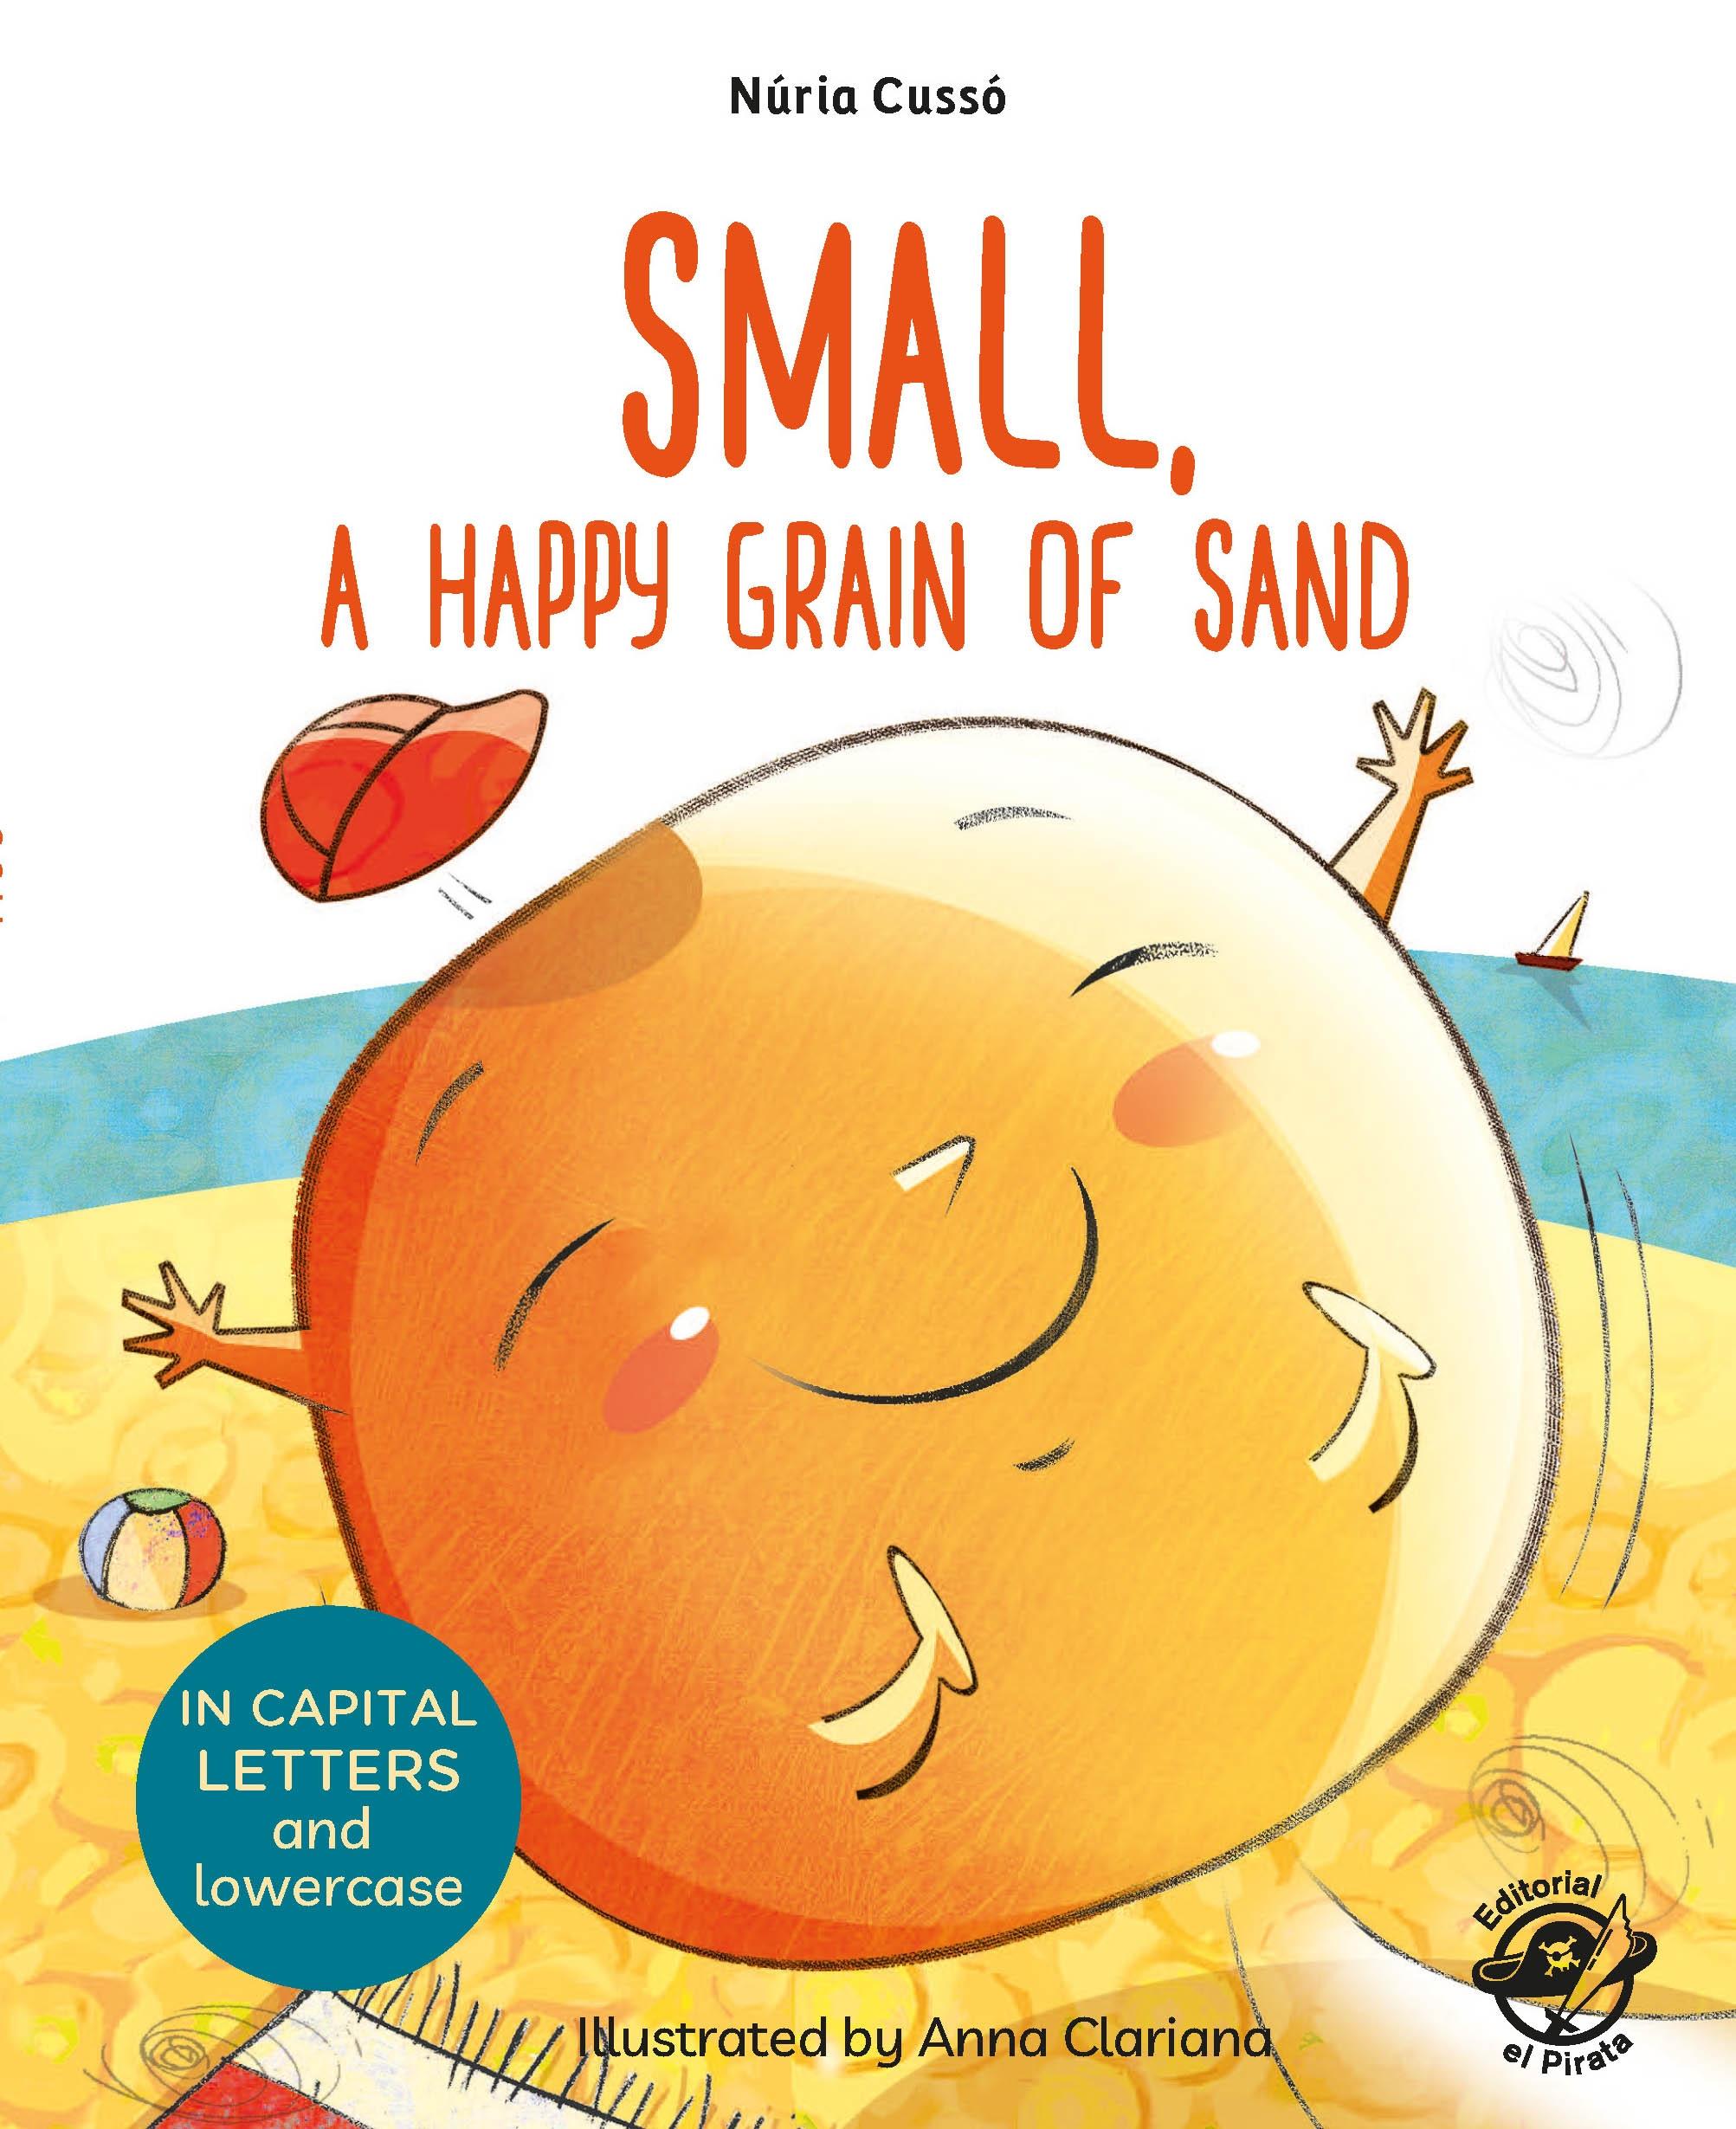 Small, a Happy Grain of Sand "English Children's Books - Learn to Read in CAPITAL Letters and Lowercas"